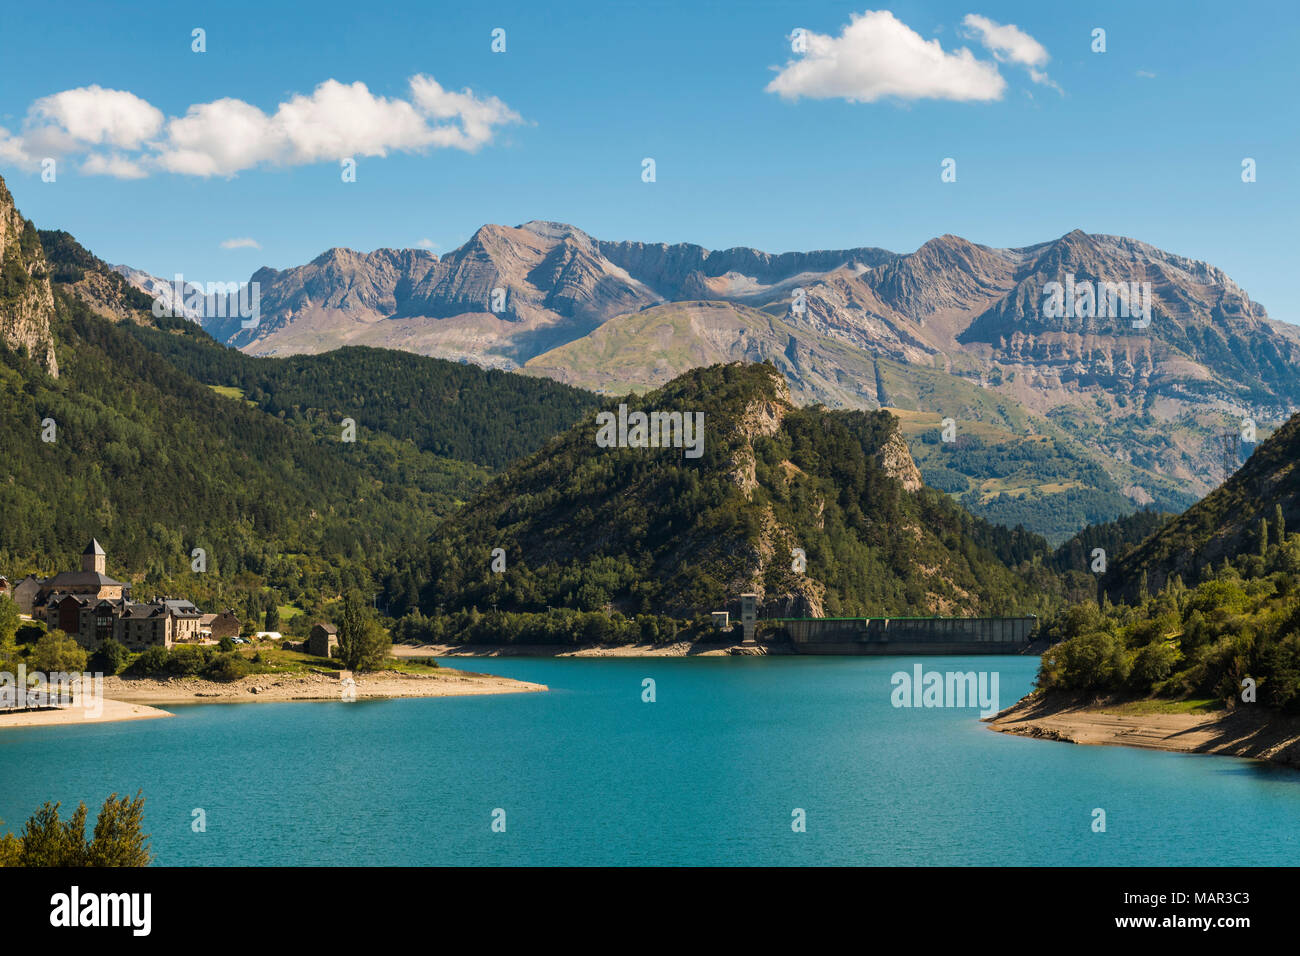 Lanuza village, resevoir and dam and the Tendenera mountains, Tena Valley, Sallent de Gallego, Pyrenees, Huesca Province, Spain, Europe Stock Photo